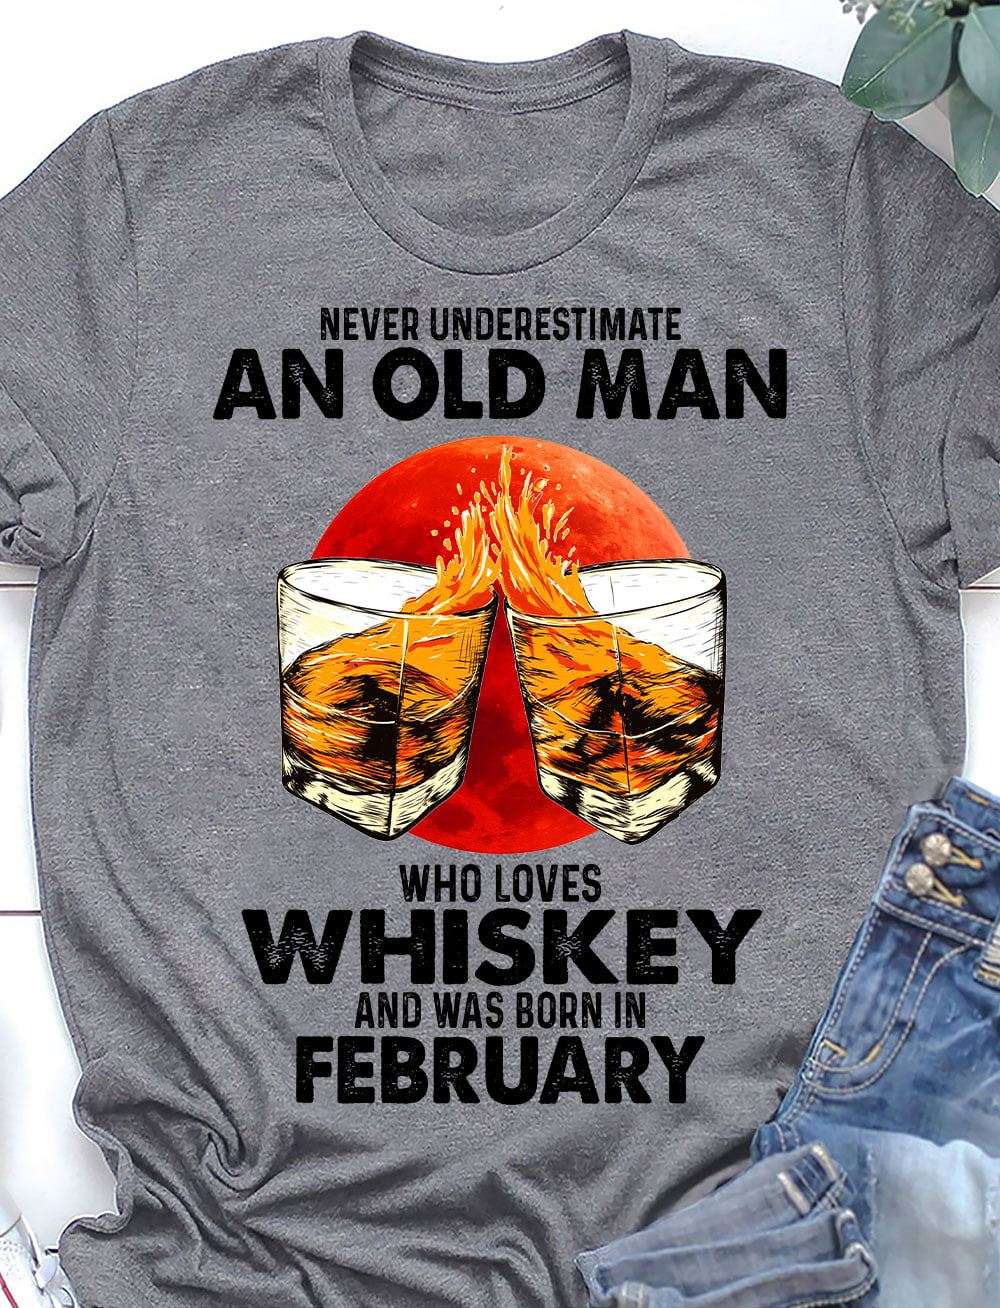 Never underestimate an old man who loves whiskey and was born in February